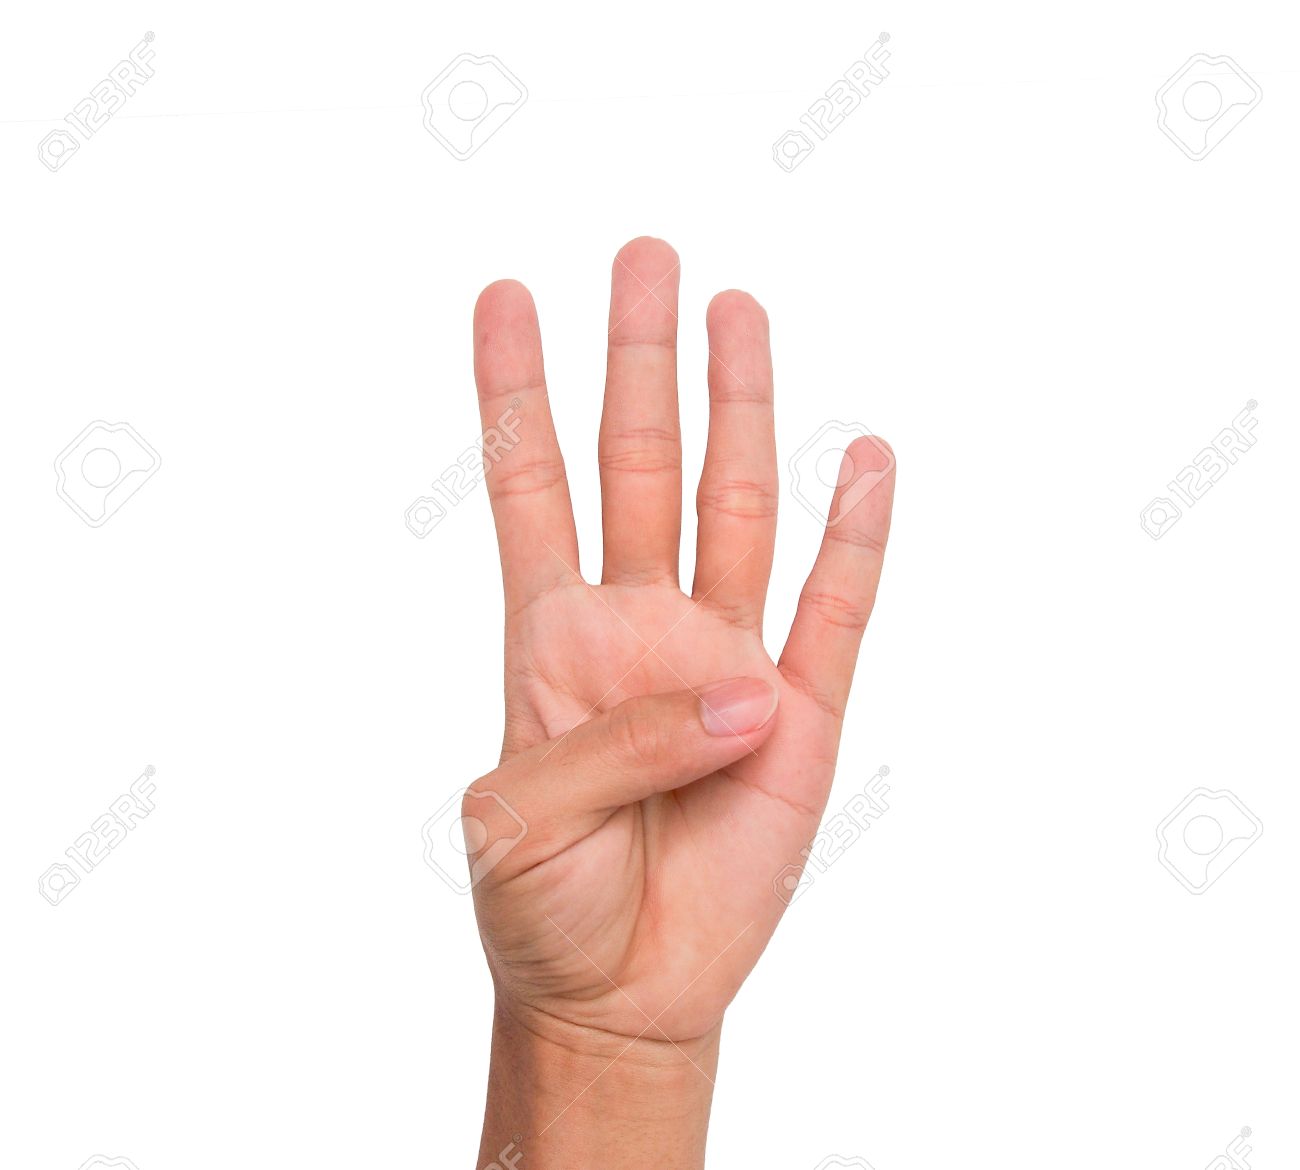 66828952-a-hand-sign-of-4-fingers-point-upward-meaning-four-fourth-etc-with-white-background.jpg